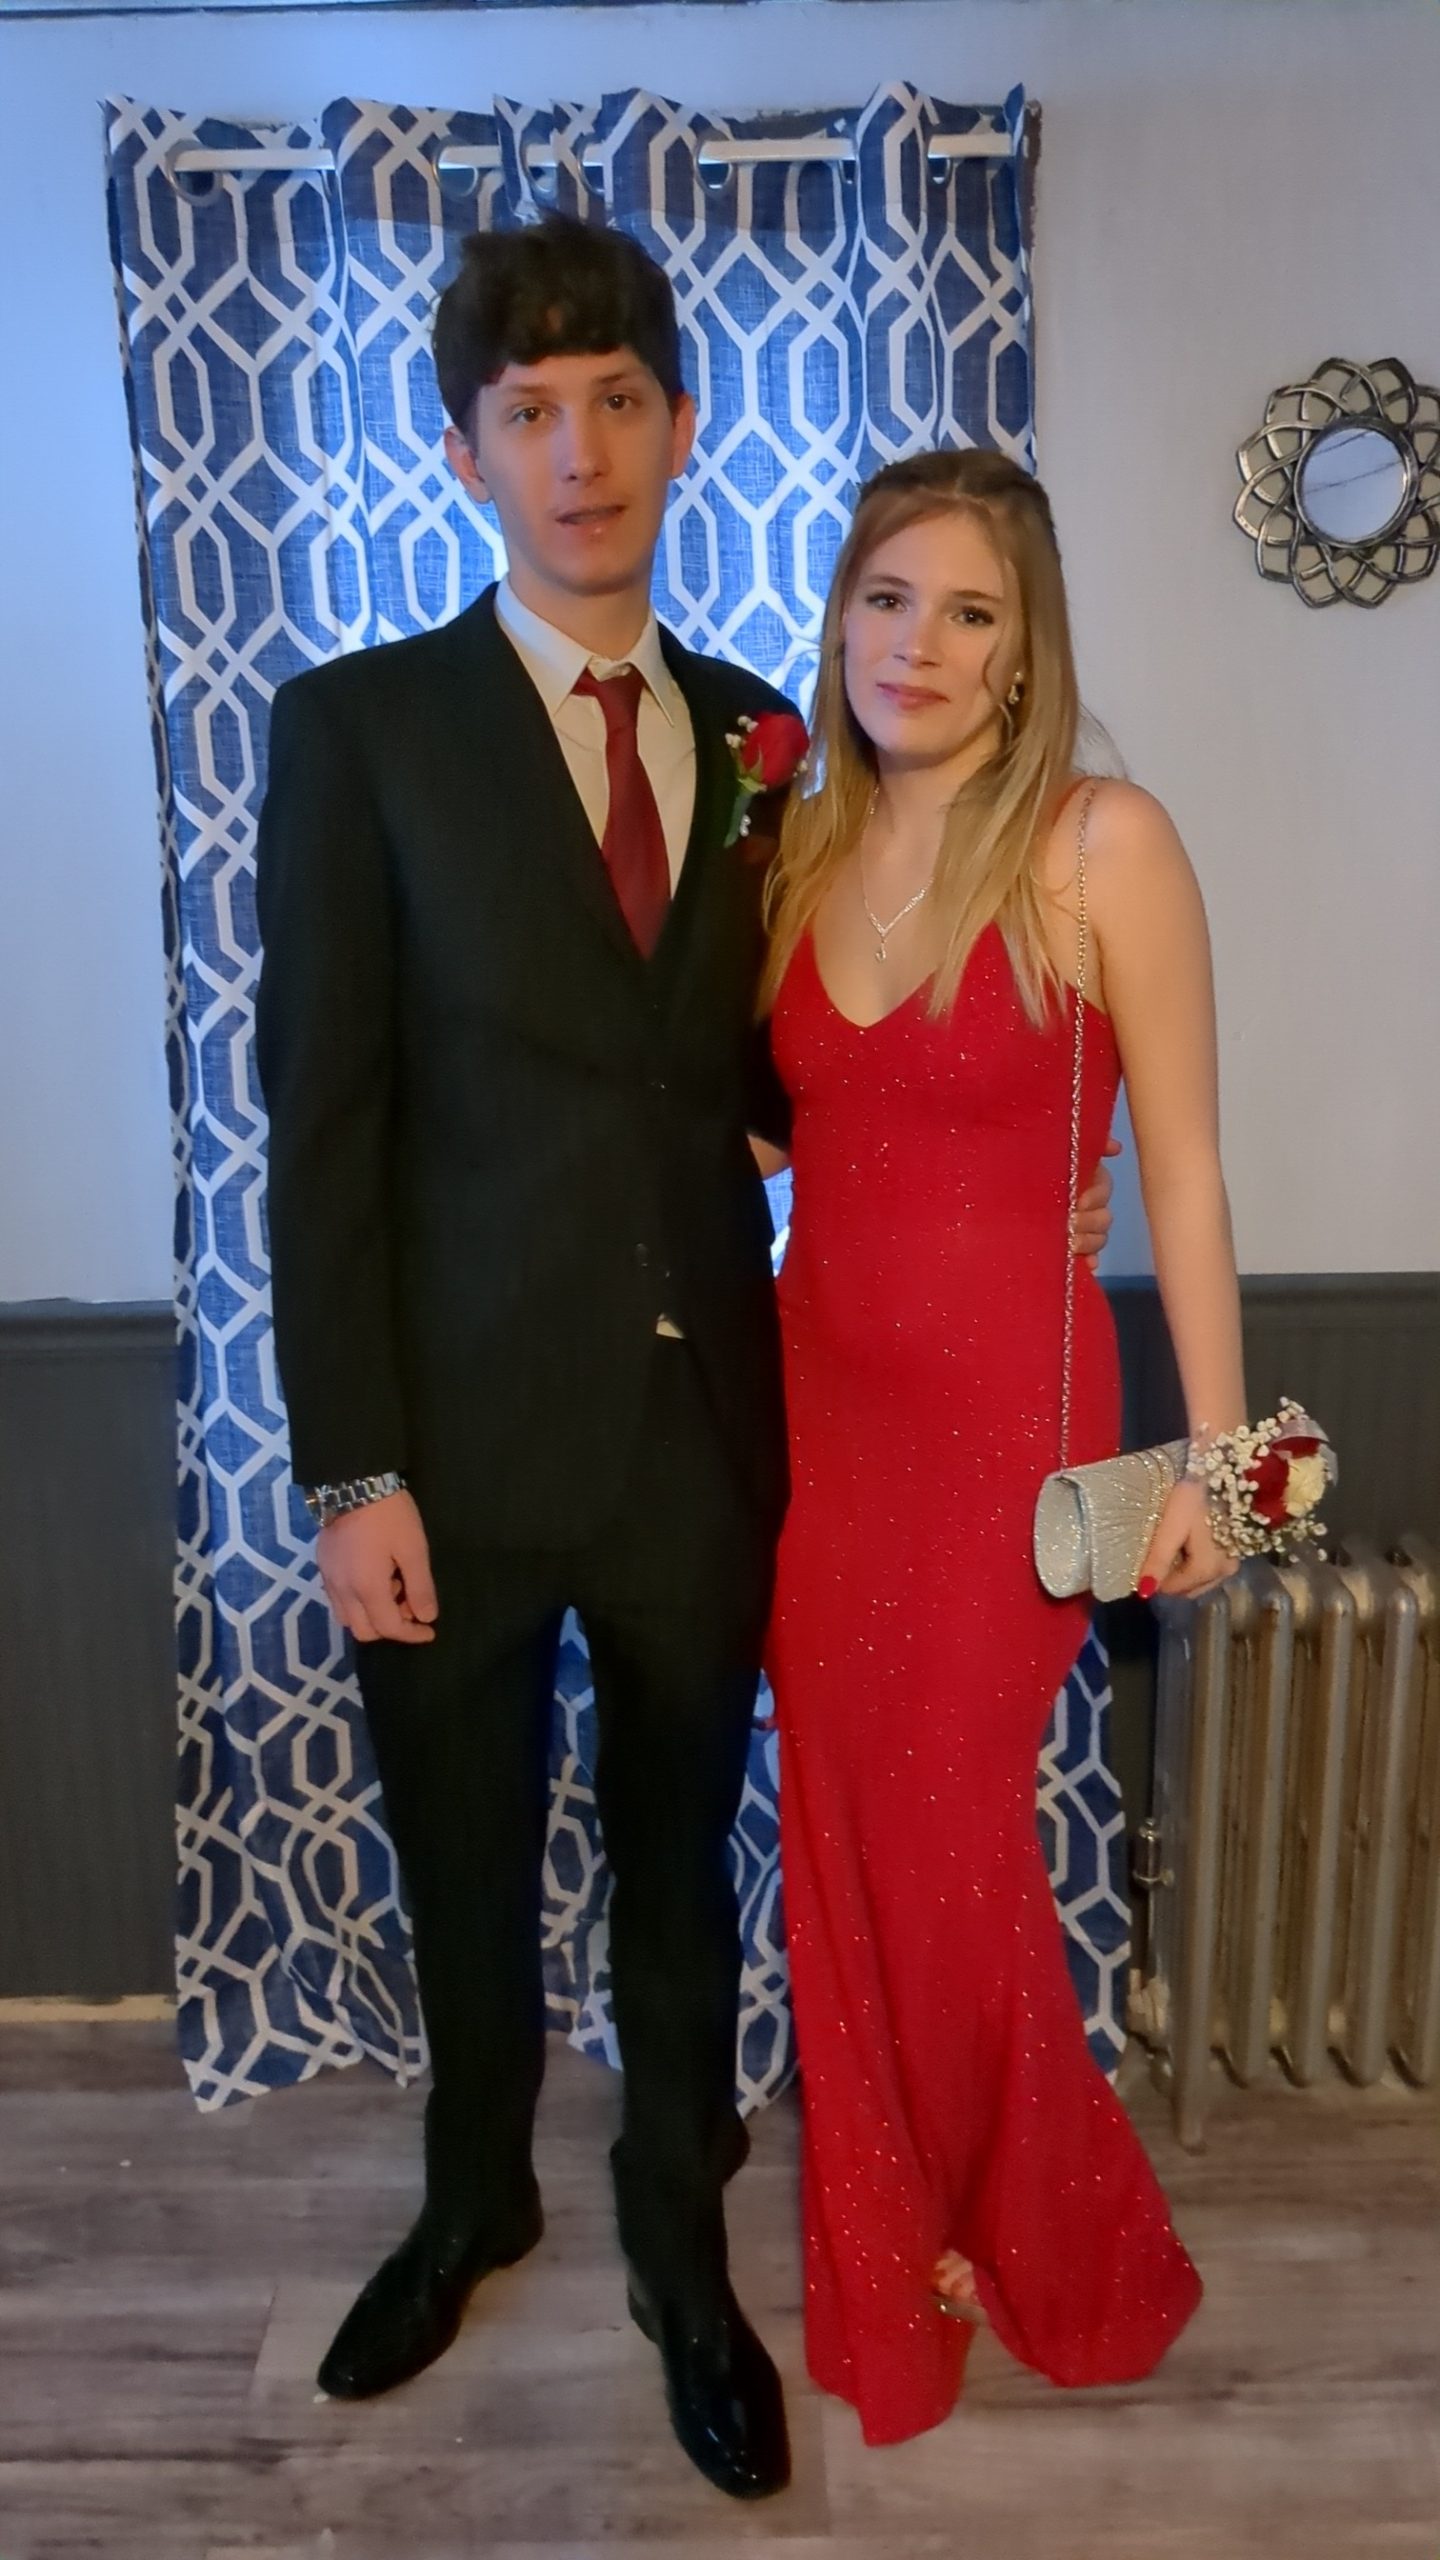 A young couple dressed in formalwear